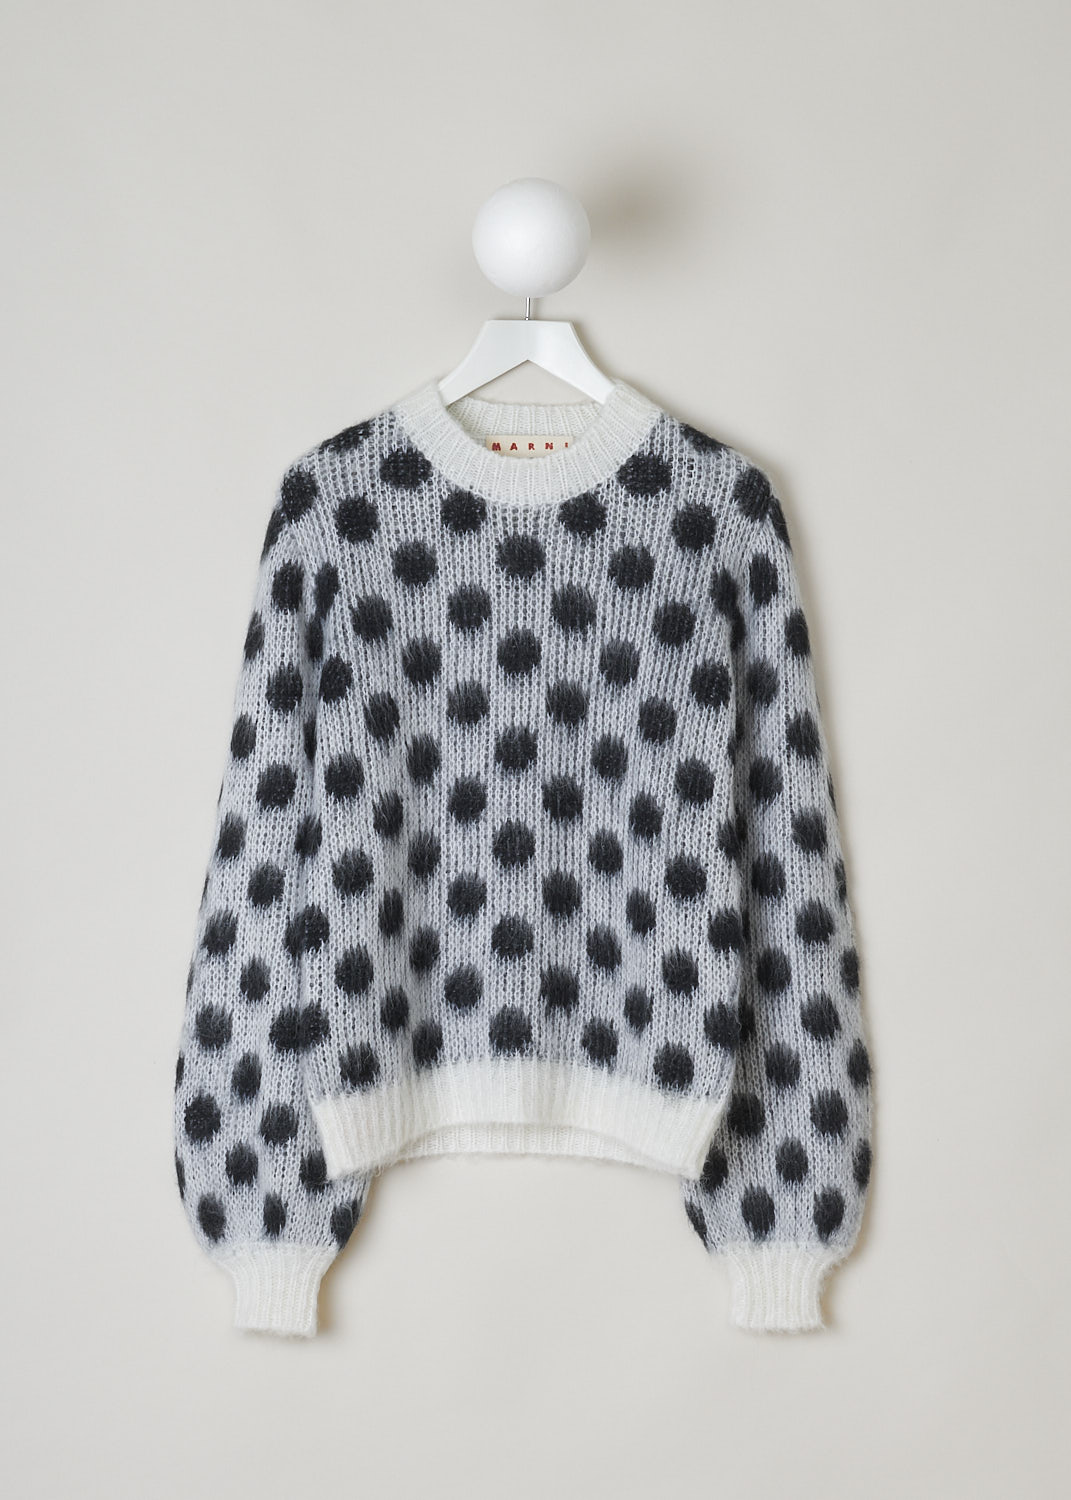 MARNI, BRUSHED DOTS FUZZY WUZZY SWEATER, GCMMD0476Q0_UFU160_DOW0, Grey, Print, Black, Front, This brushed dots Fuzzy Wuzzy crew neck sweater has a white neckline with a ribbed finish. That same white ribbed finish can be found on the cuffs and hemline. The sweater has a two-tone dot pattern in grey and black.
